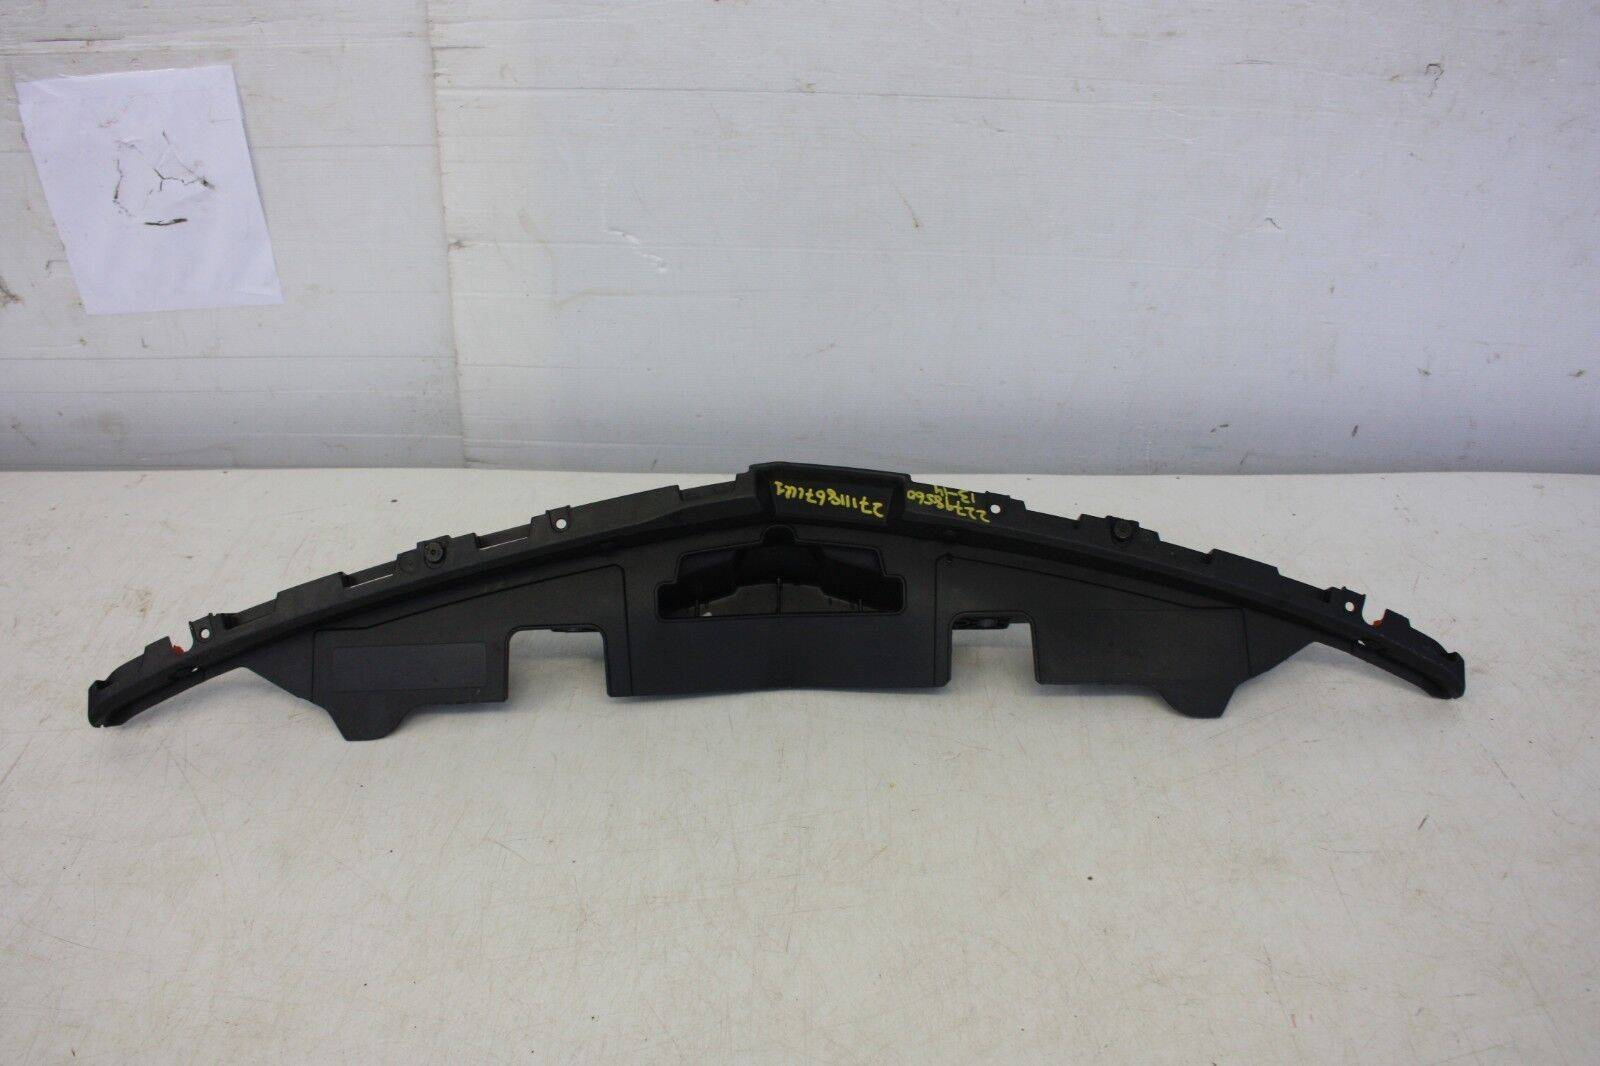 VAUXHALL-INSIGNIA-FRONT-BUMPER-SUPPORT-2013-TO-2017-175367531250-4